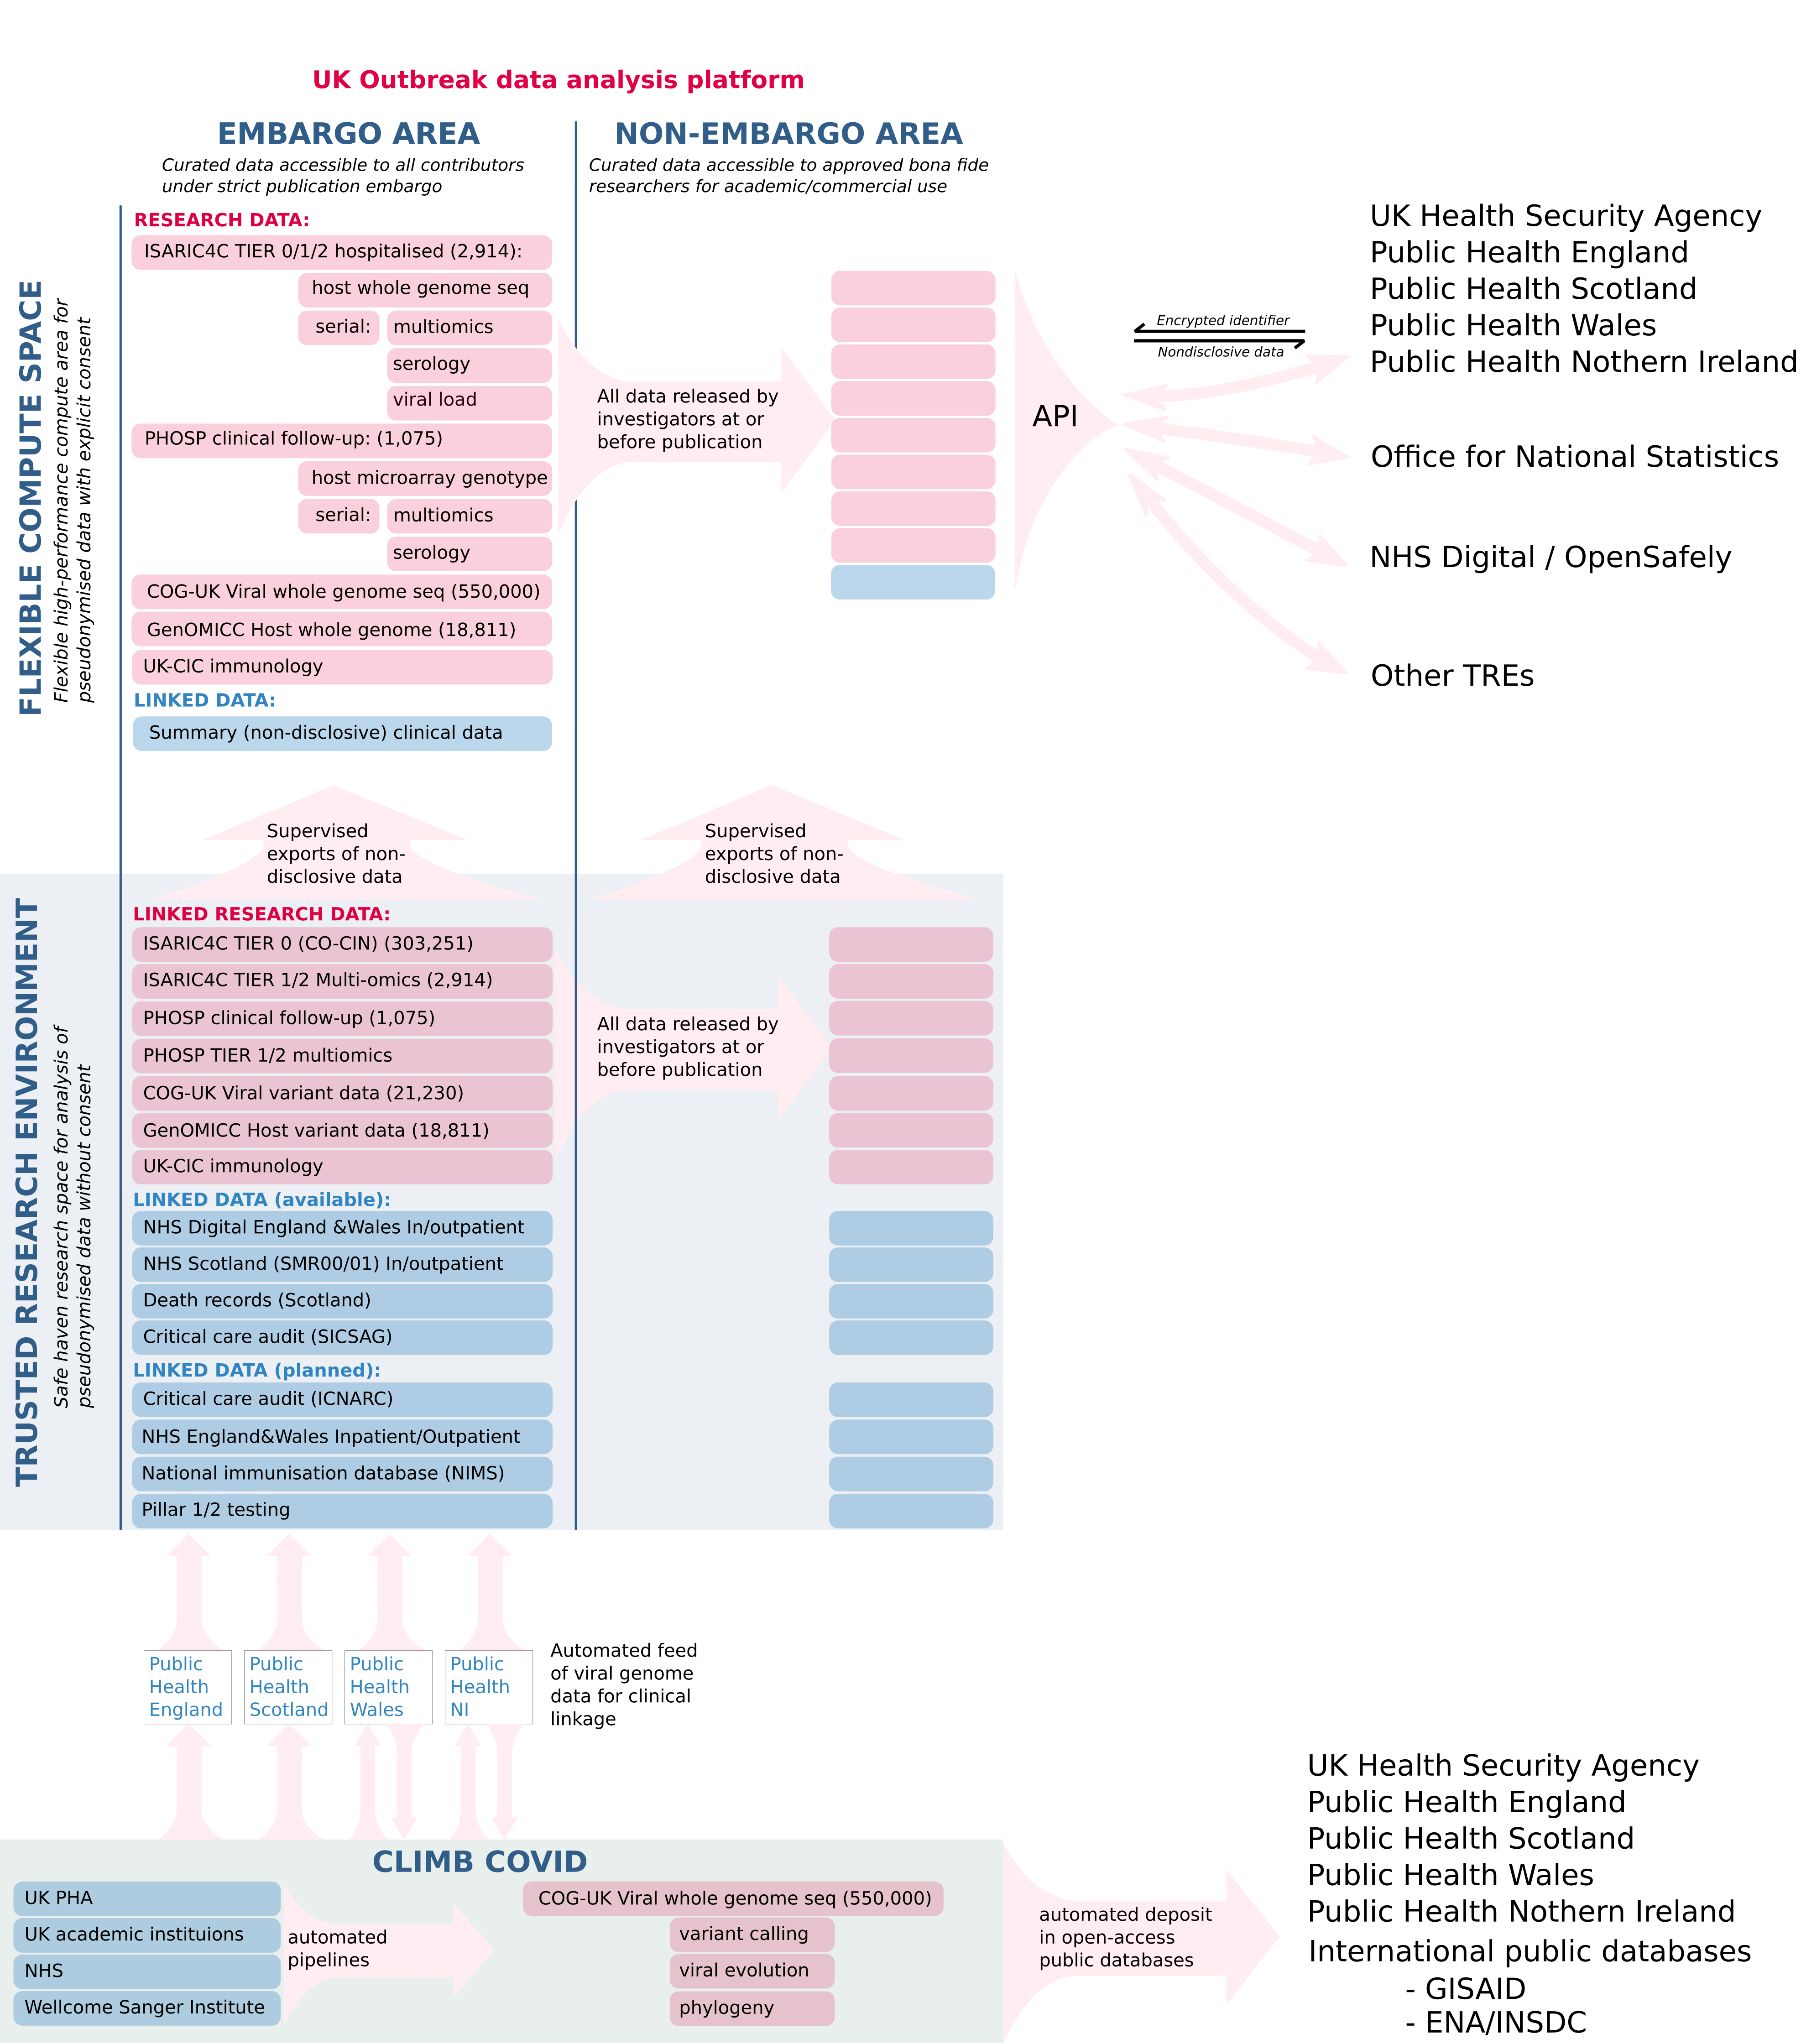 Structure of the Outbreak Analysis Platform